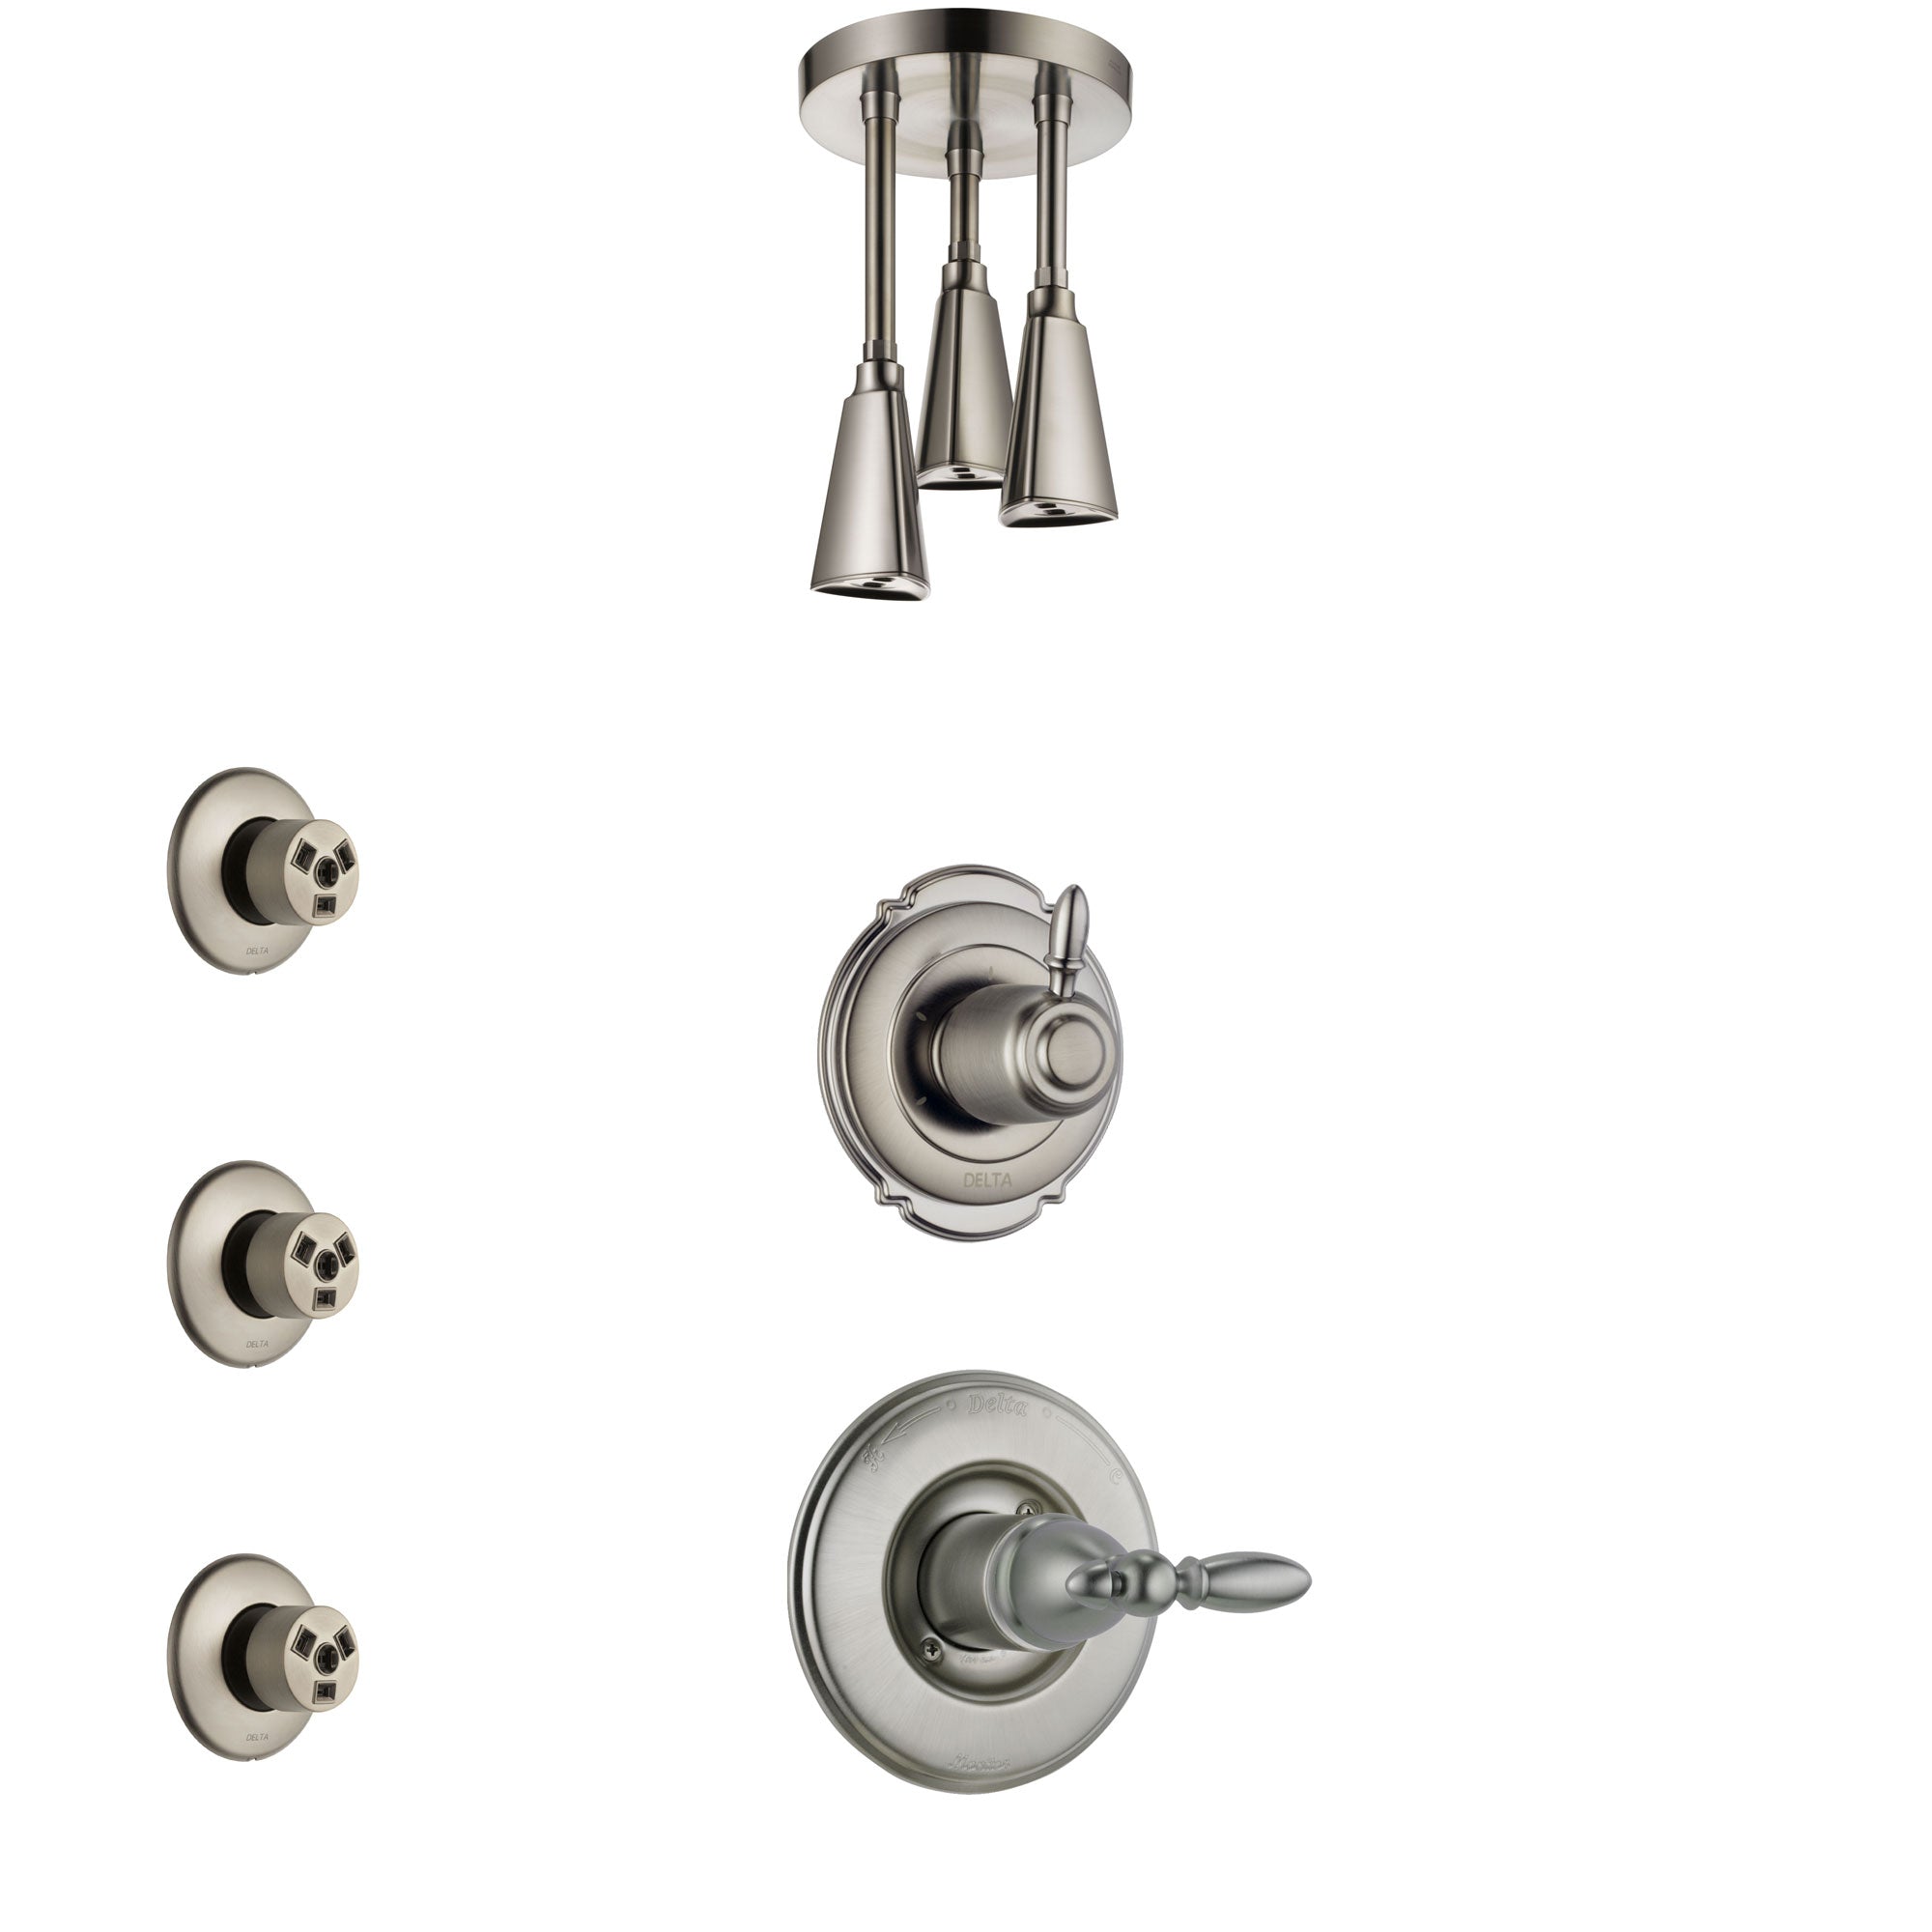 Delta Victorian Stainless Steel Finish Shower System with Control Handle, 3-Setting Diverter, Ceiling Mount Showerhead, and 3 Body Sprays SS1455SS6